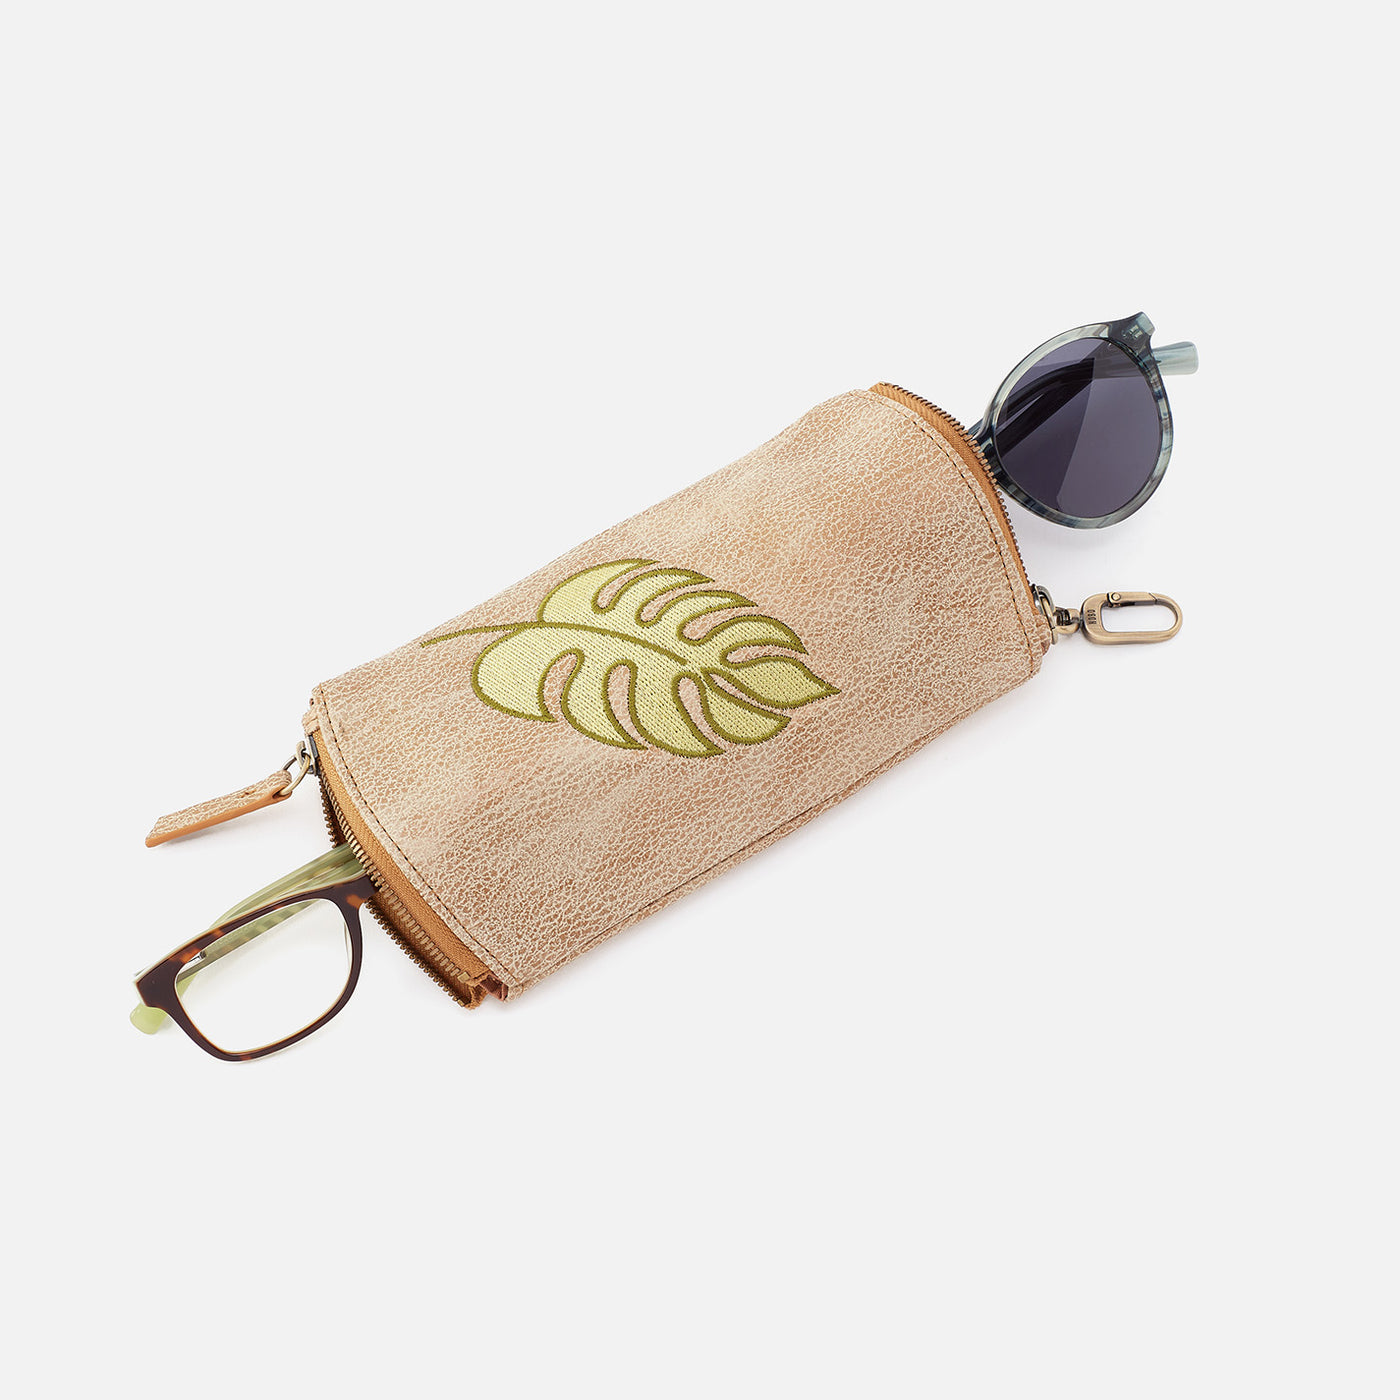 Spark Double Eyeglass Case in Metallic Leather - Gold Leaf